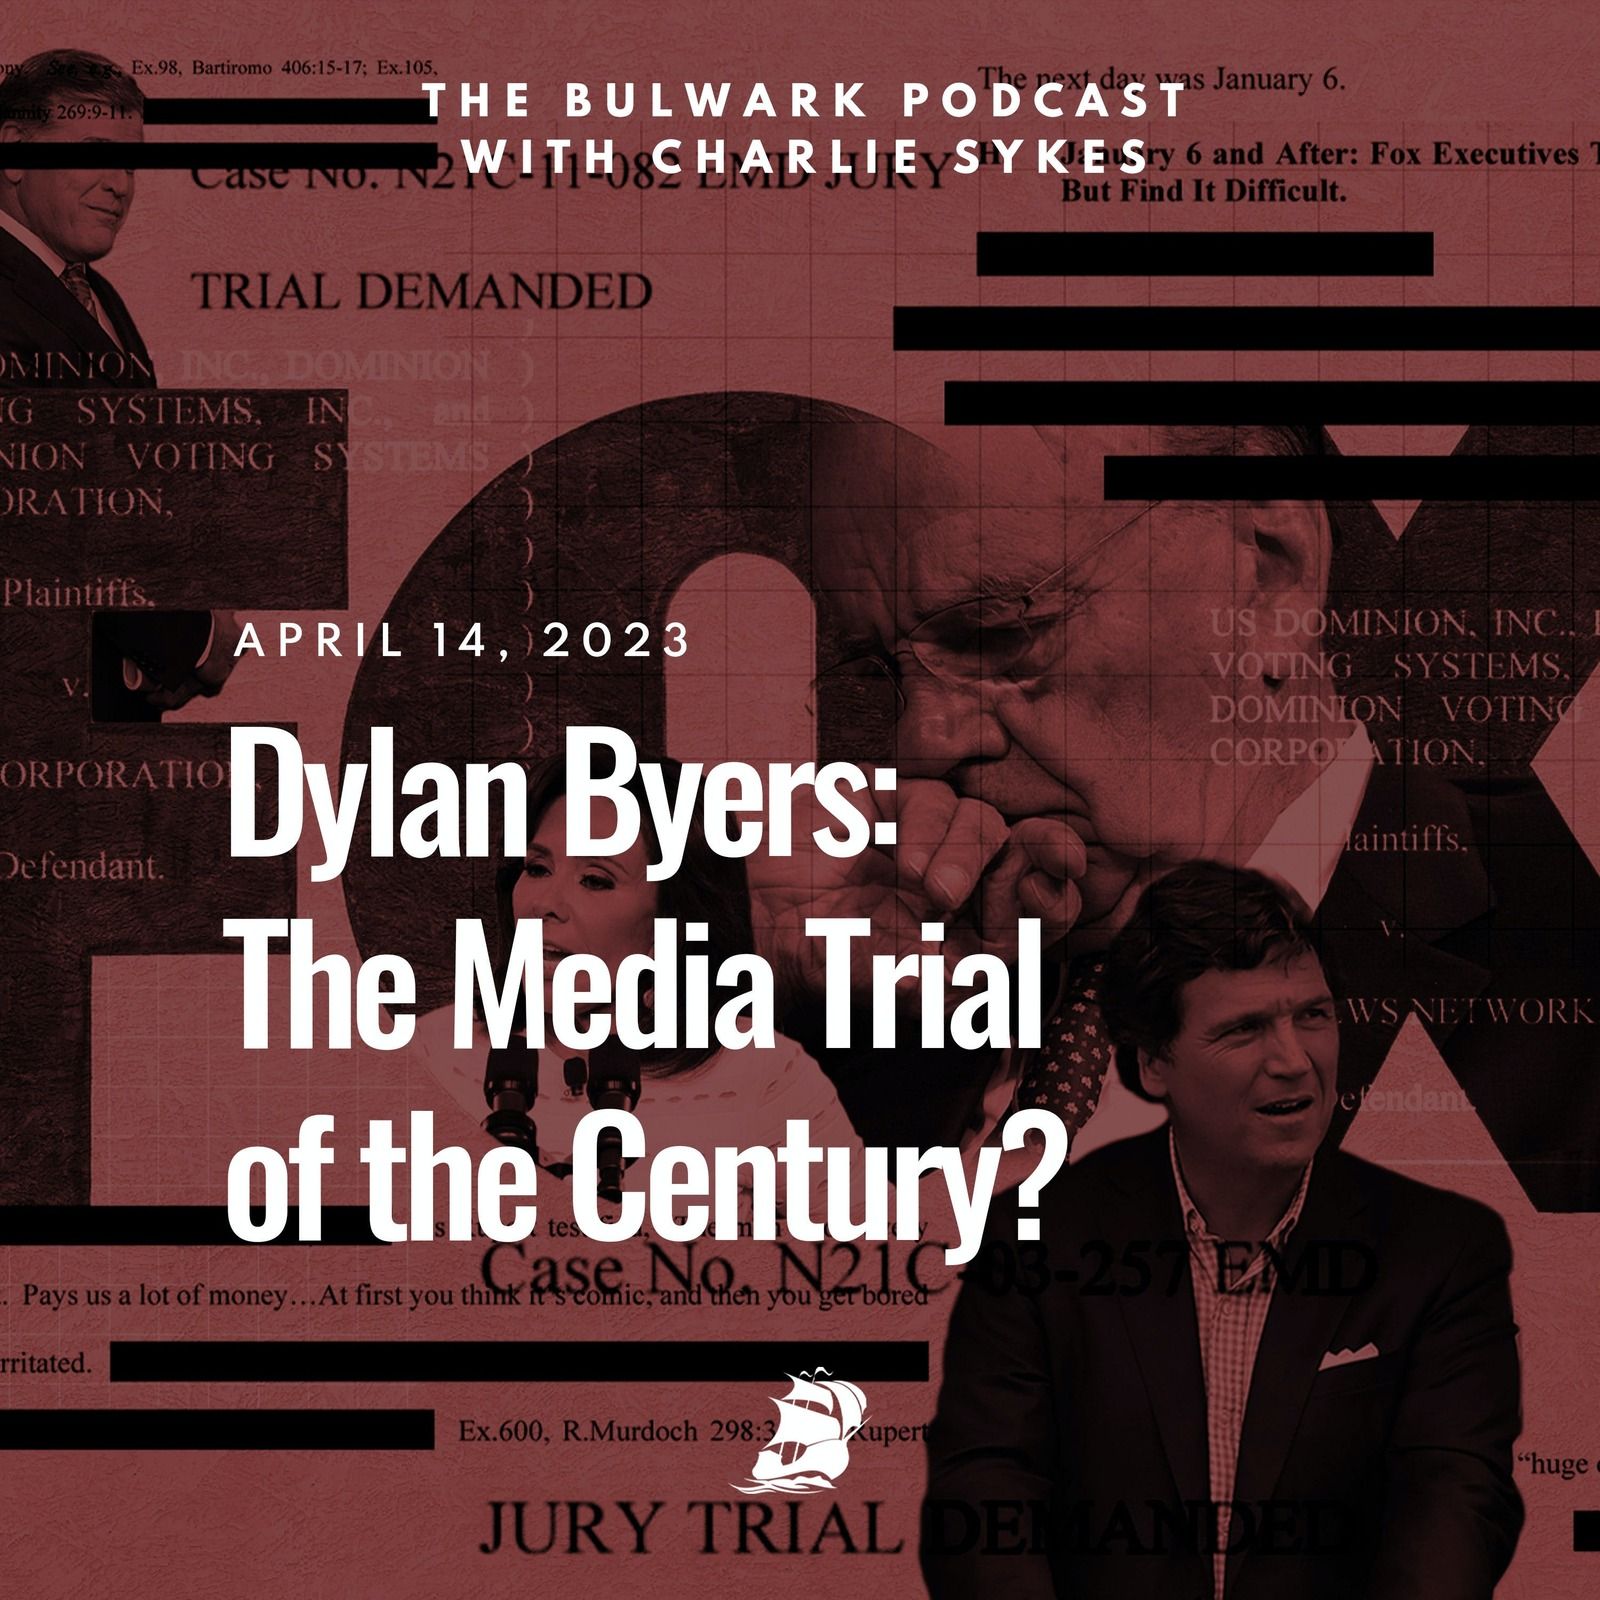 Dylan Byers: The Media Trial of the Century? by The Bulwark Podcast